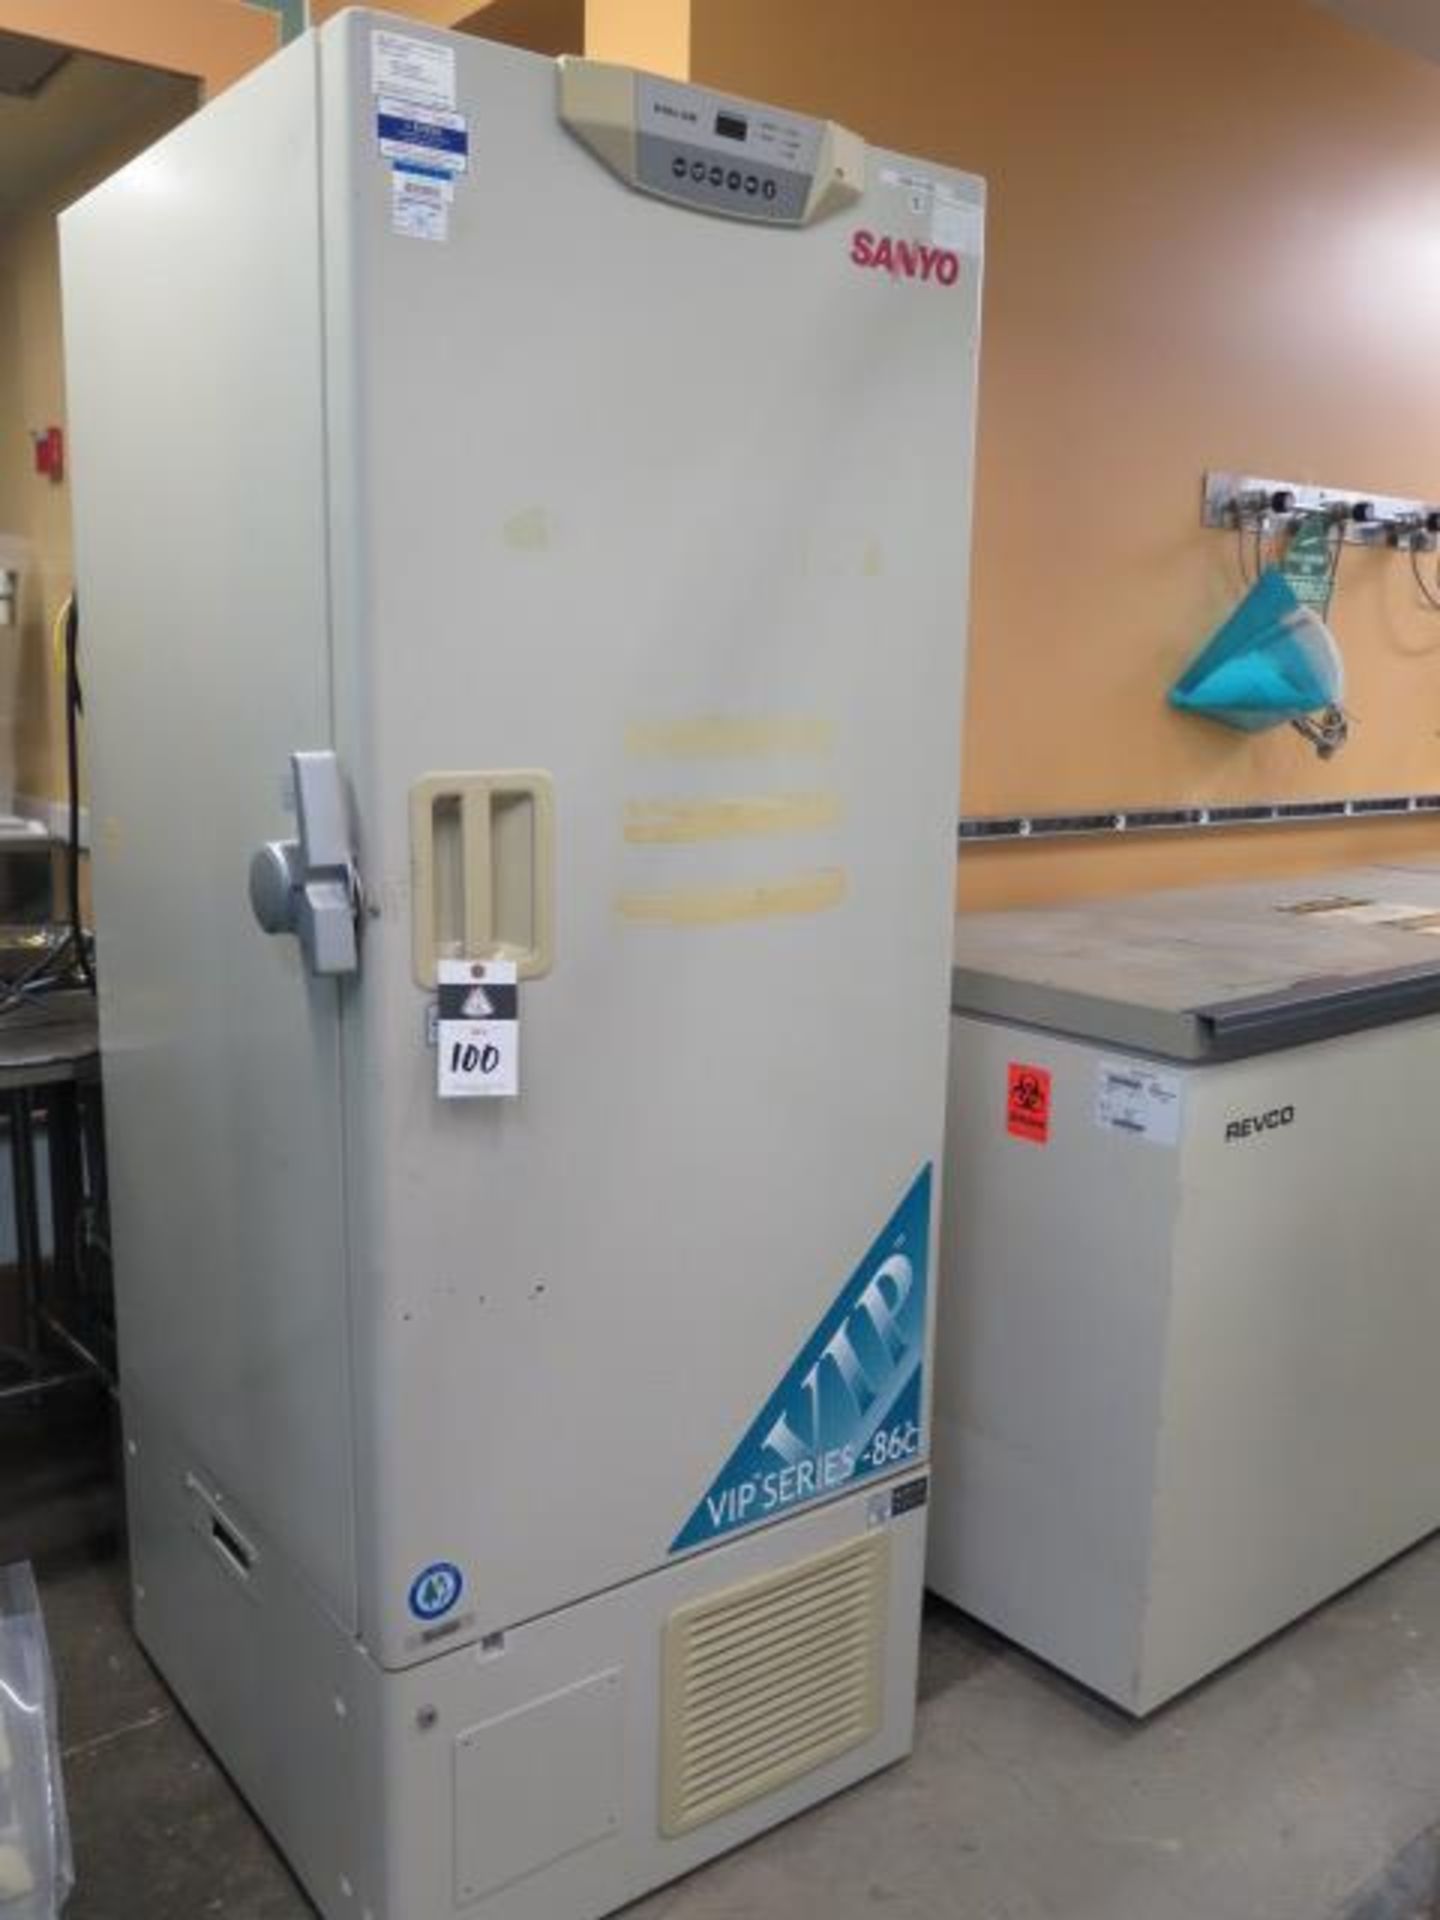 Sanyo “Ultra Low” VIP Series mdl. MDF-U52VC -86 Degree C Laboratory Freezer s/n 50709004 (SOLD AS-IS - Image 2 of 12